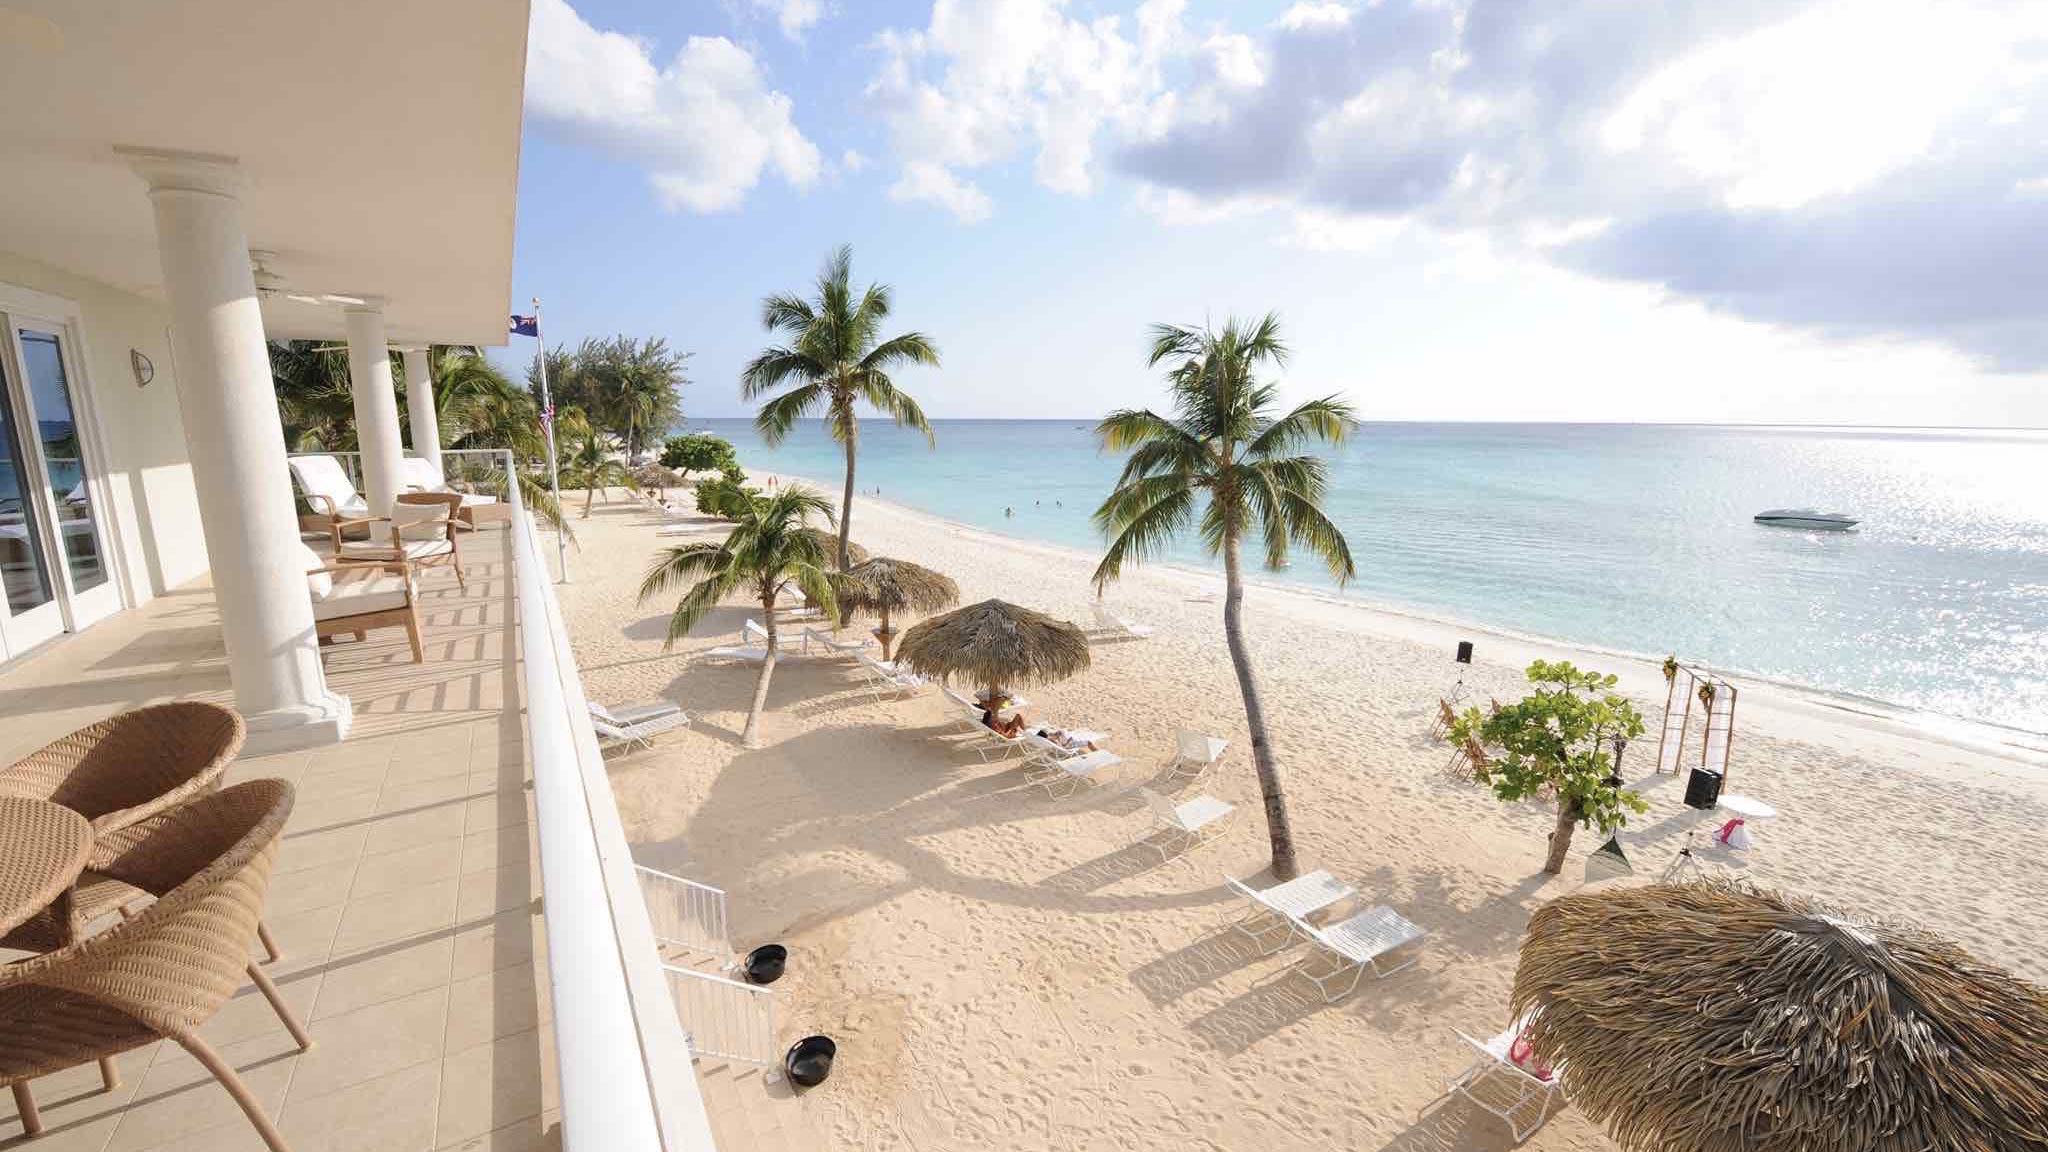 Caribbean Club balcony view over beach at one of the best luxury hotels in Cayman Islands